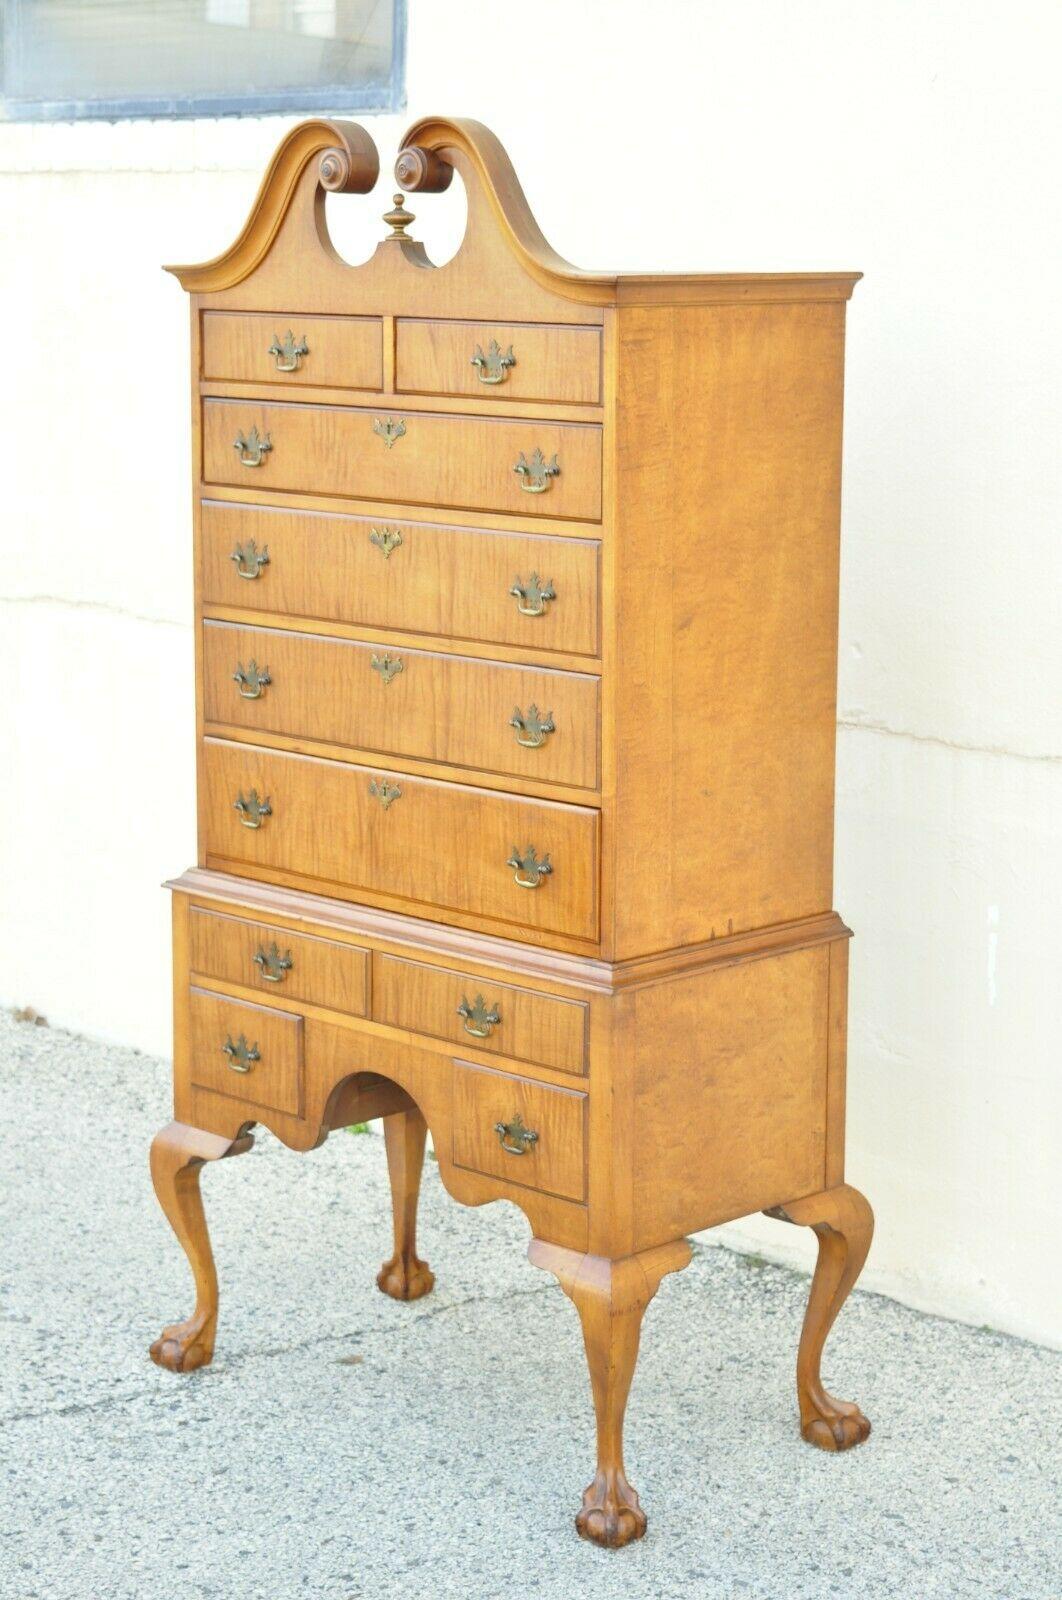 Antique curly tiger maple chippendale style highboy fall front secretary desk dresser. Item features a beautiful woodgrain, nicely carved details, no key, but unlocked, 8 dovetailed drawers, carved ball and claw feet, solid brass hardware, quality